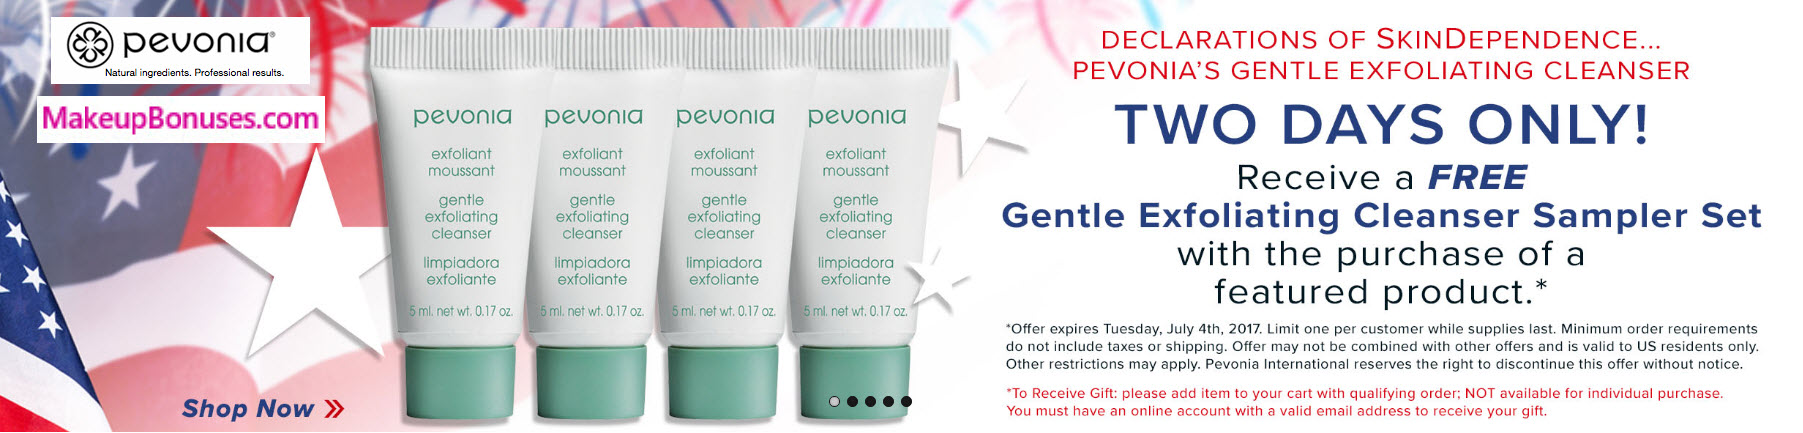 Receive a free 4-pc gift with your featured product purchase